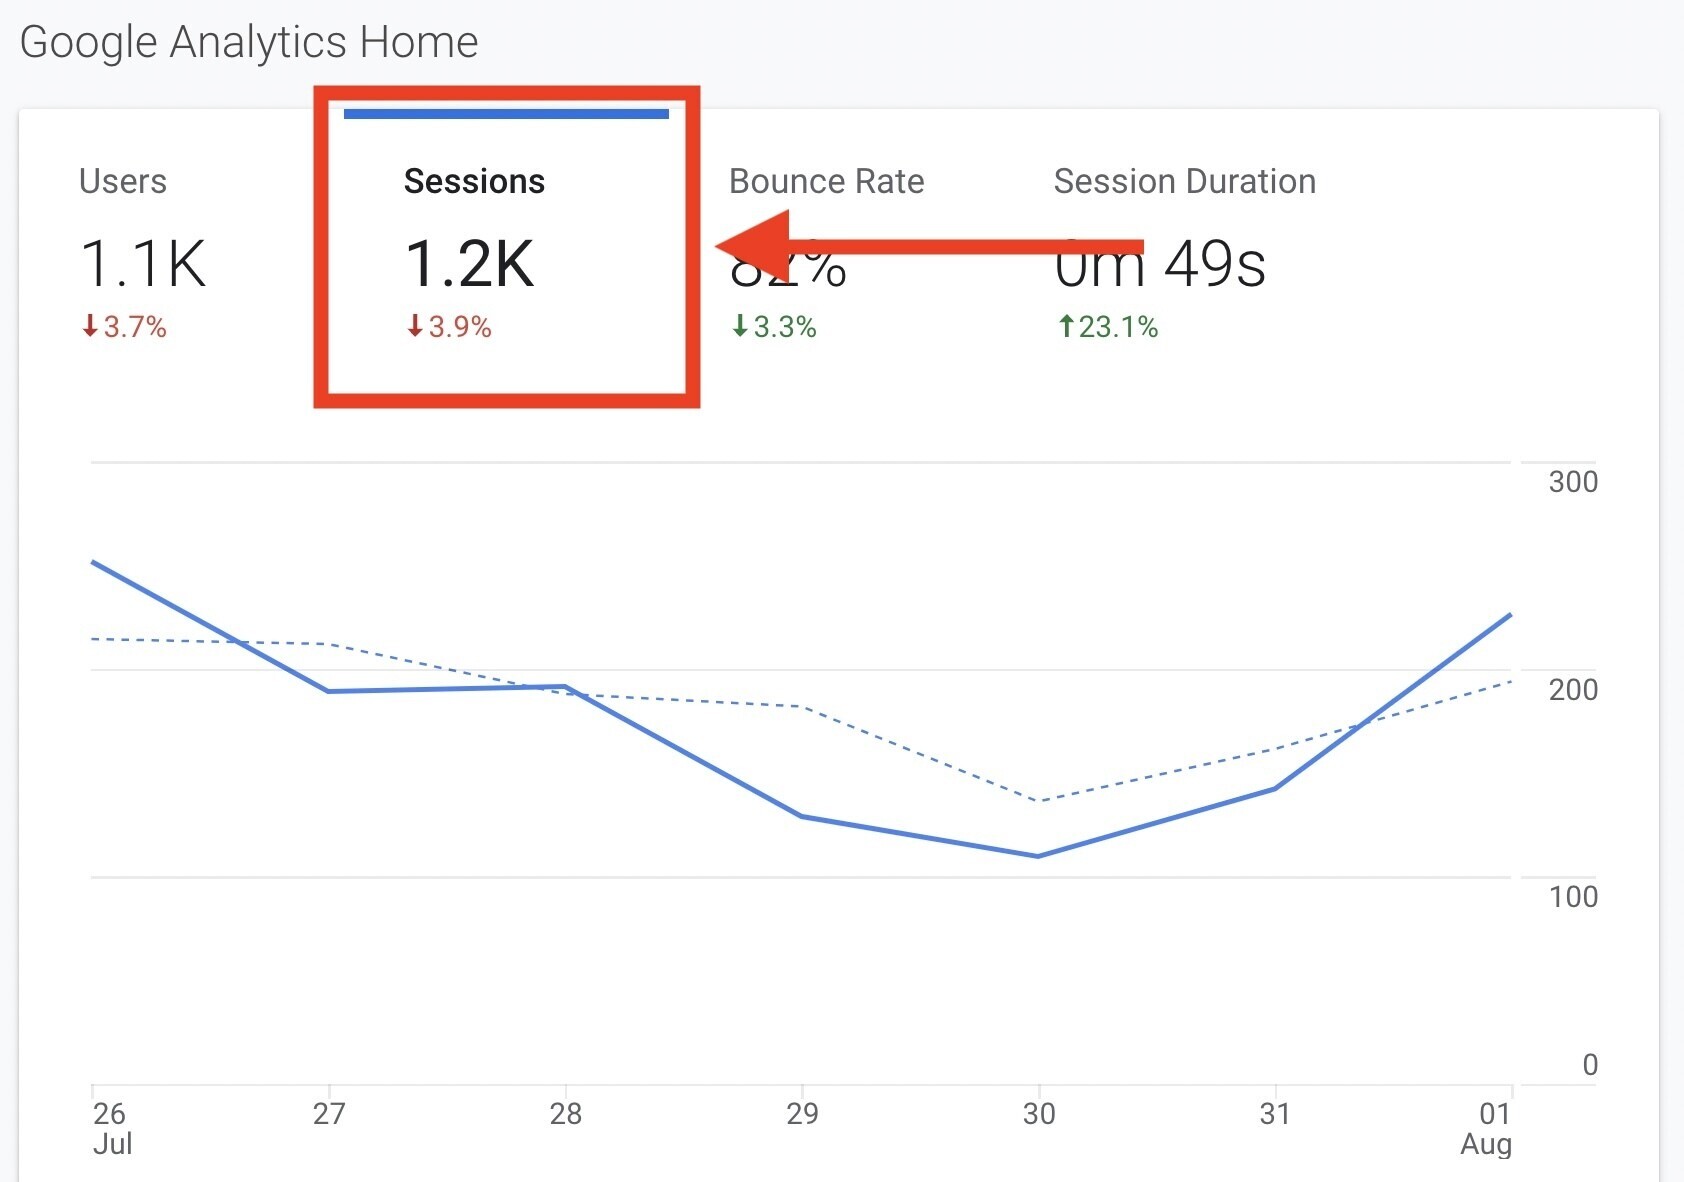 Sessions in Google Analytics